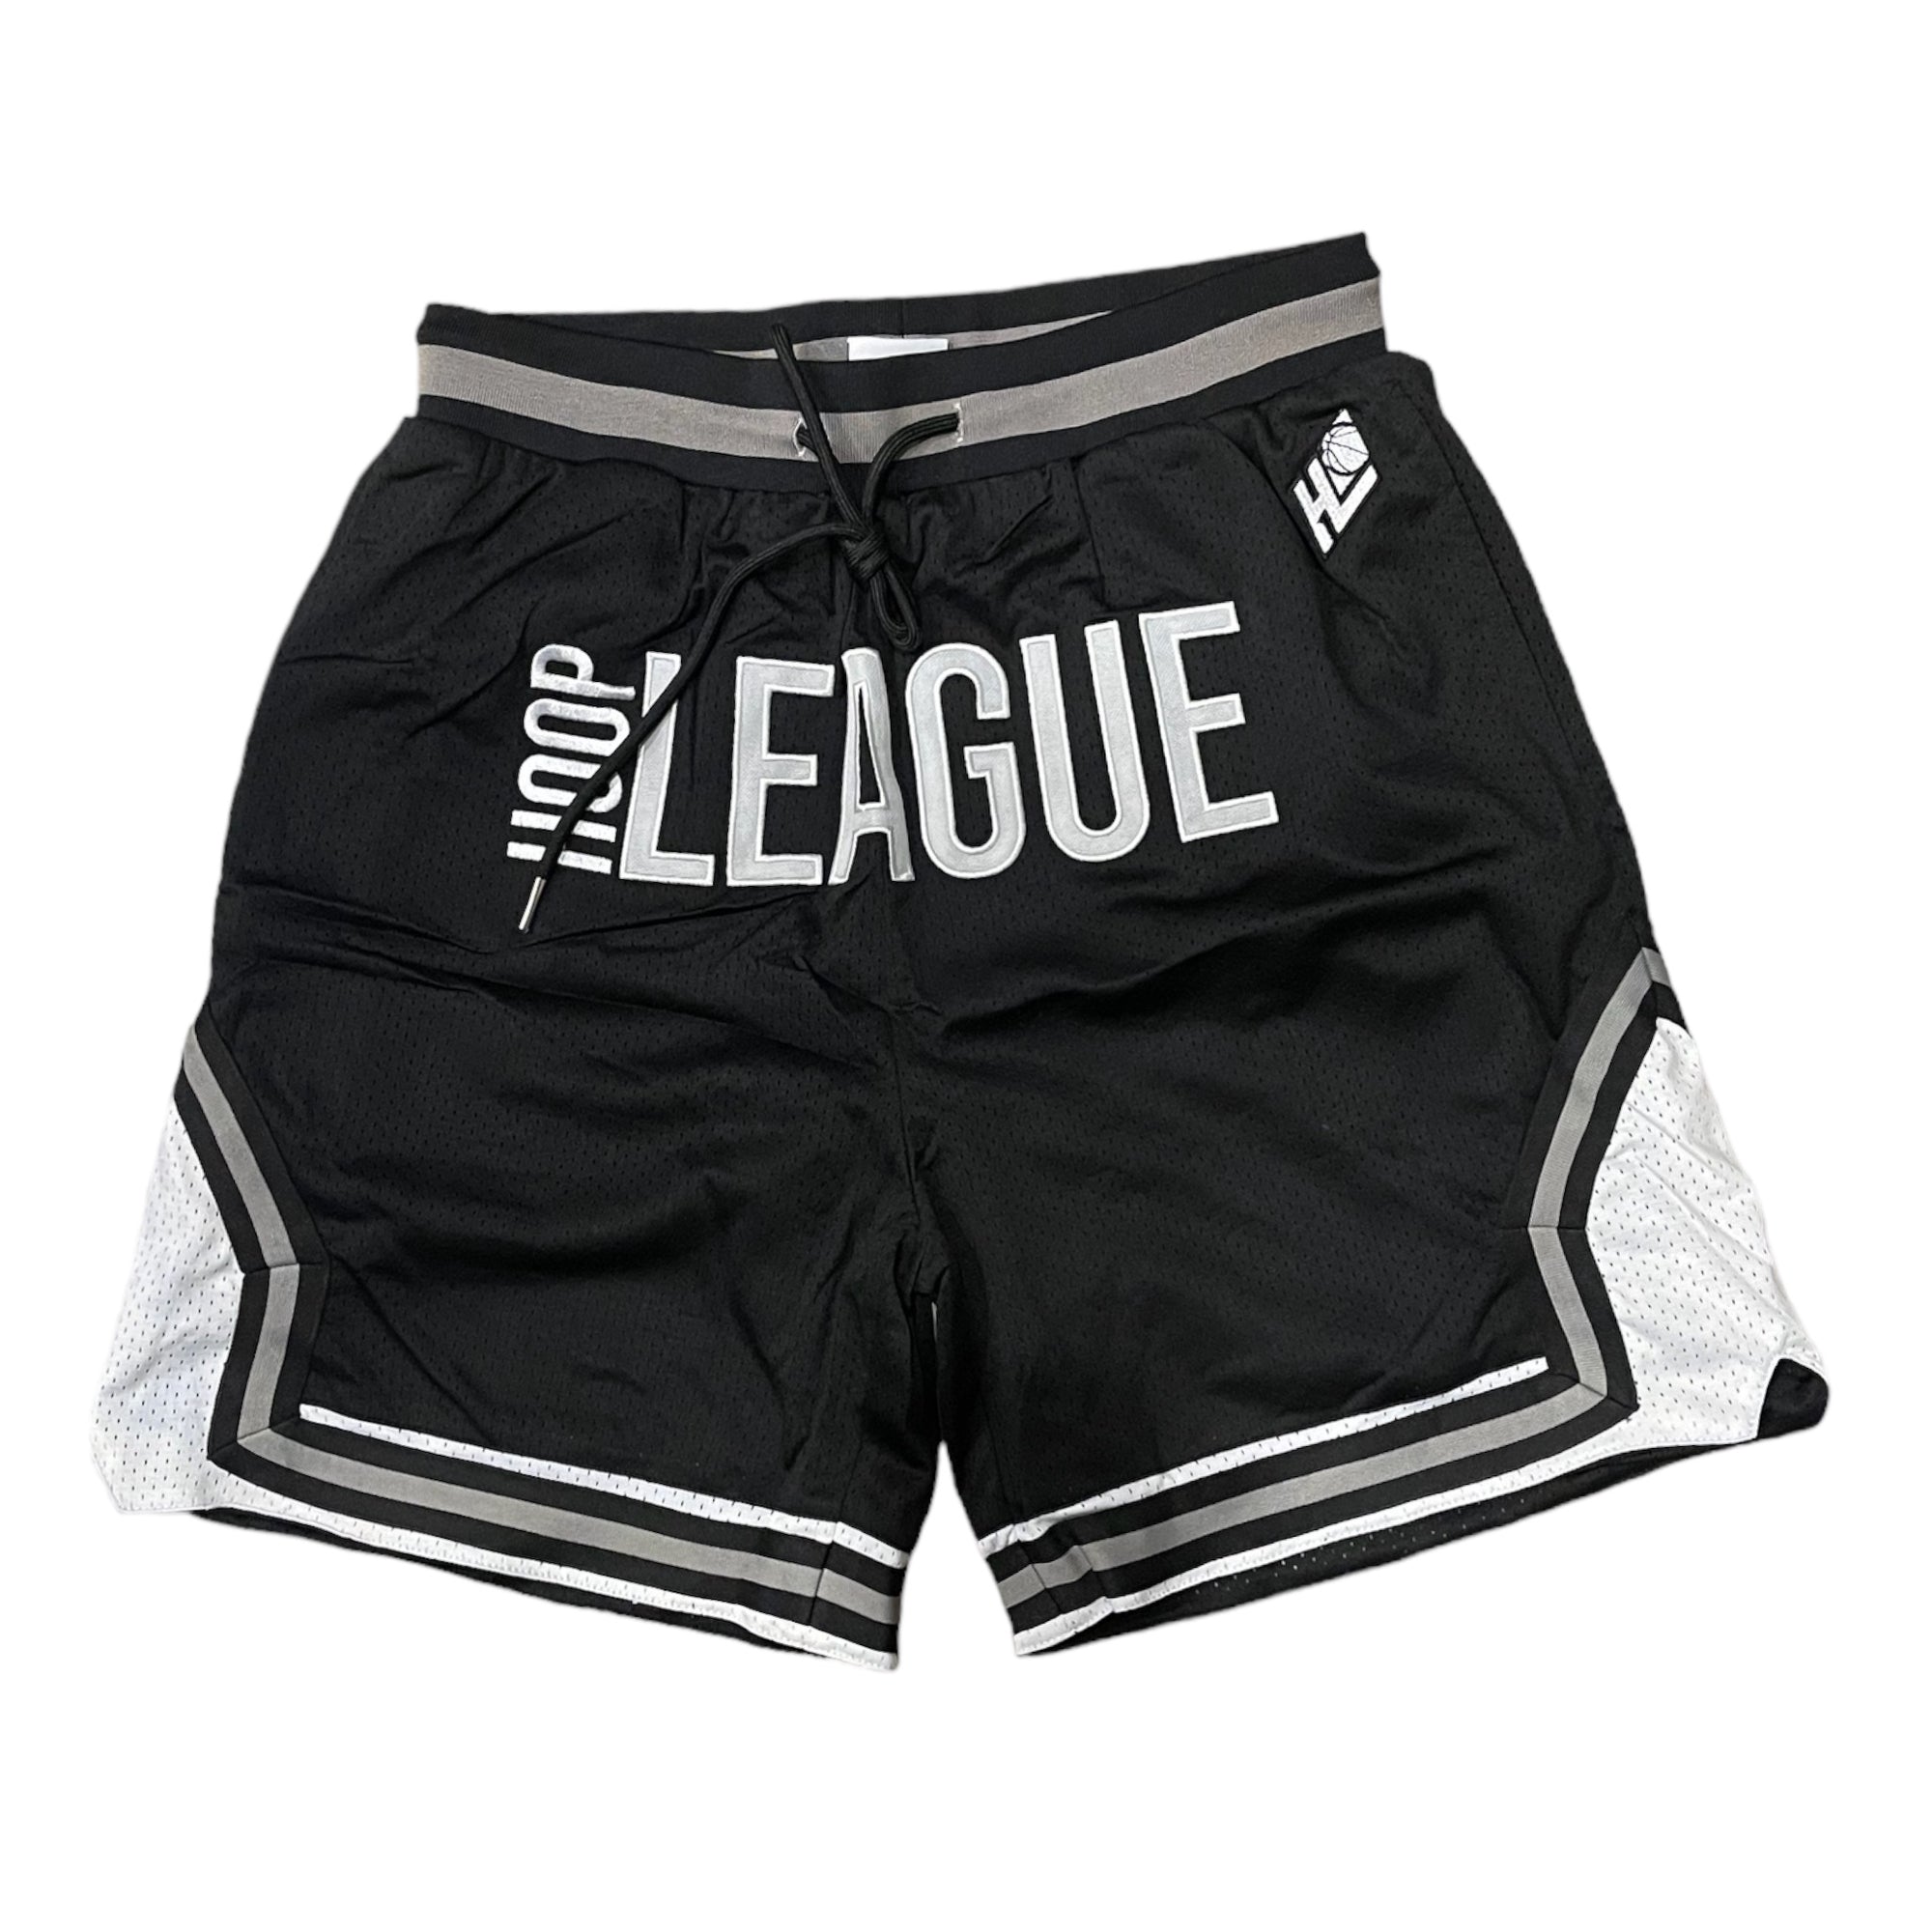 Hoop League Stitched Classic San Antonio Game Ready Shorts Black